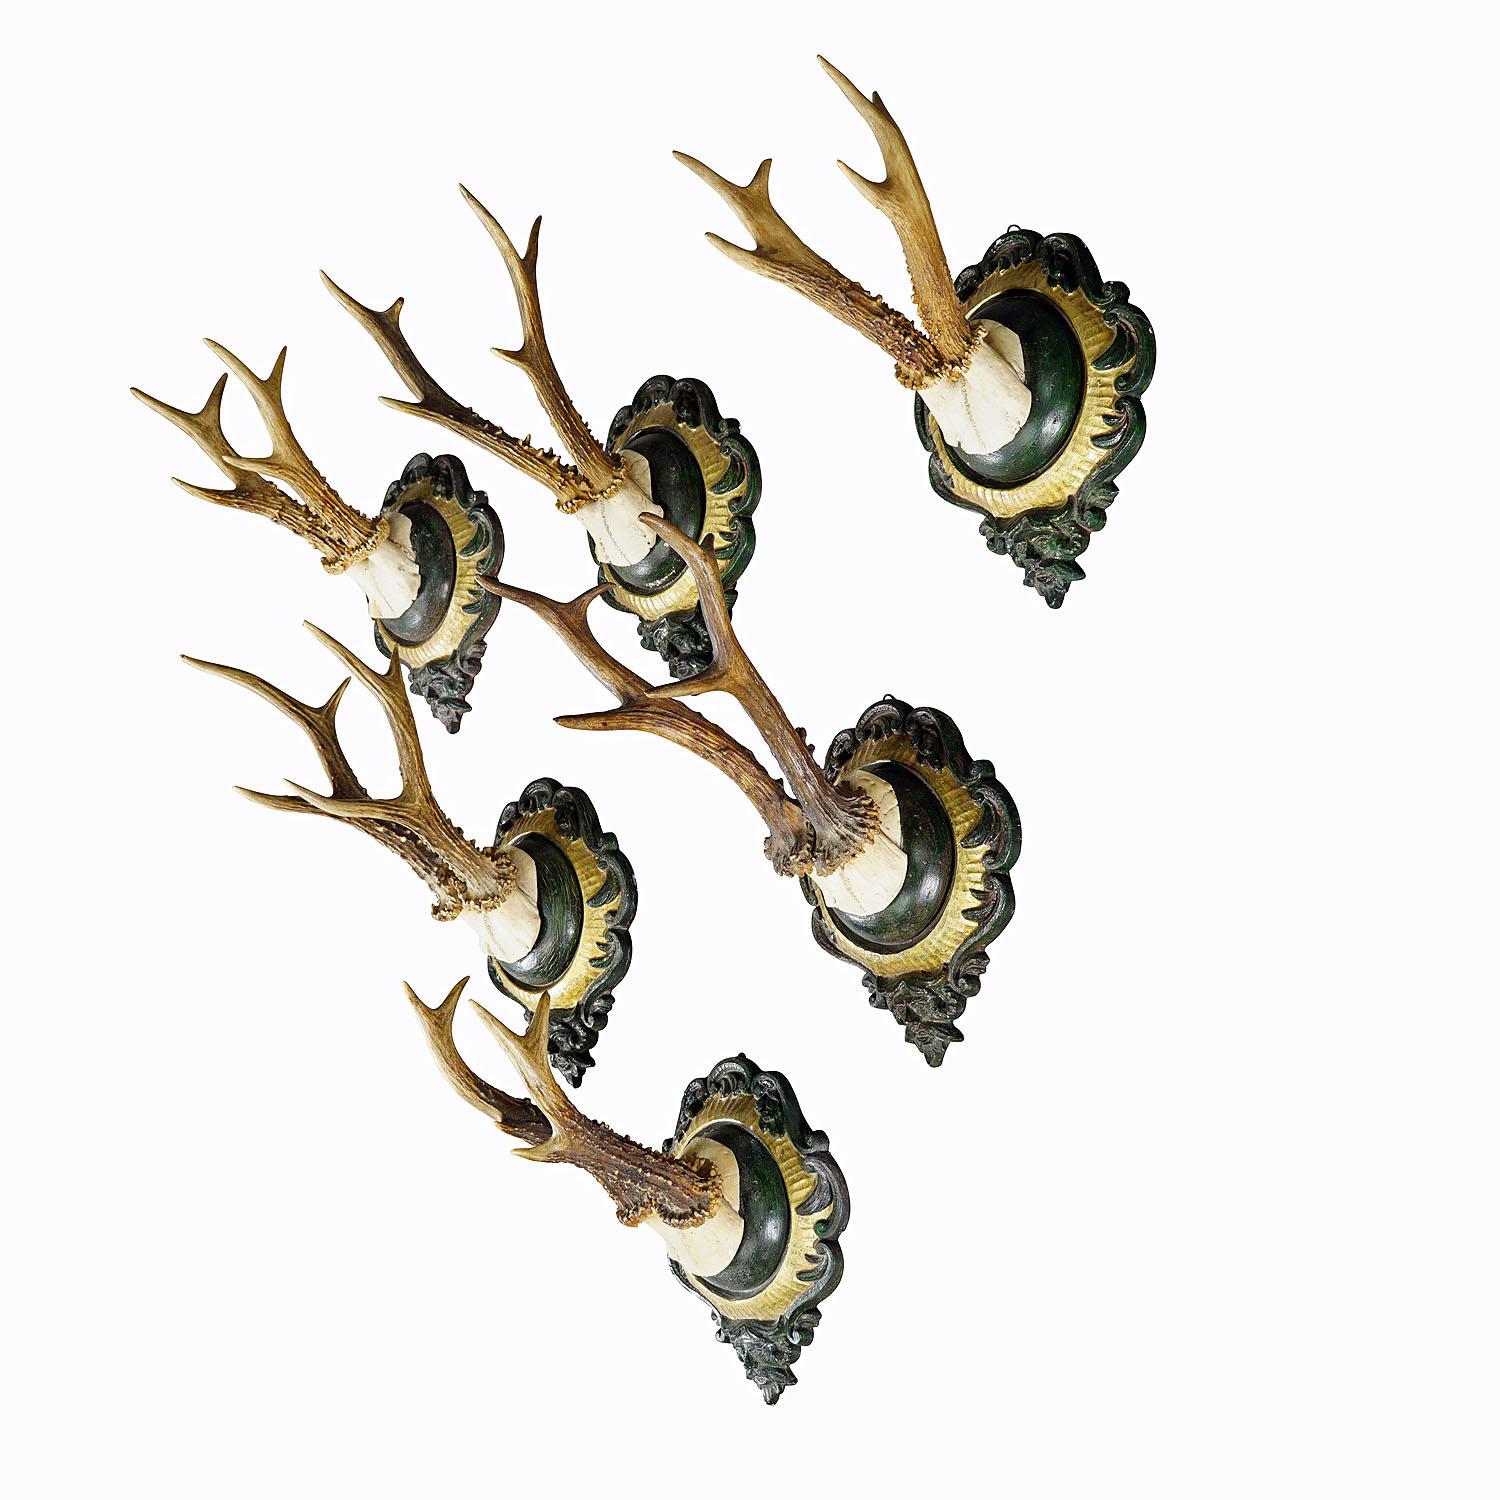 Six Large Vintage Deer Trophies on Plaster Plaques Germany ca. 1960s

A set of six large Black Forest deer (Capreolus capreolus) trophies mounted on casted plaster plaques. The plaques with green and gilt finish feature a gargoile head on the base.